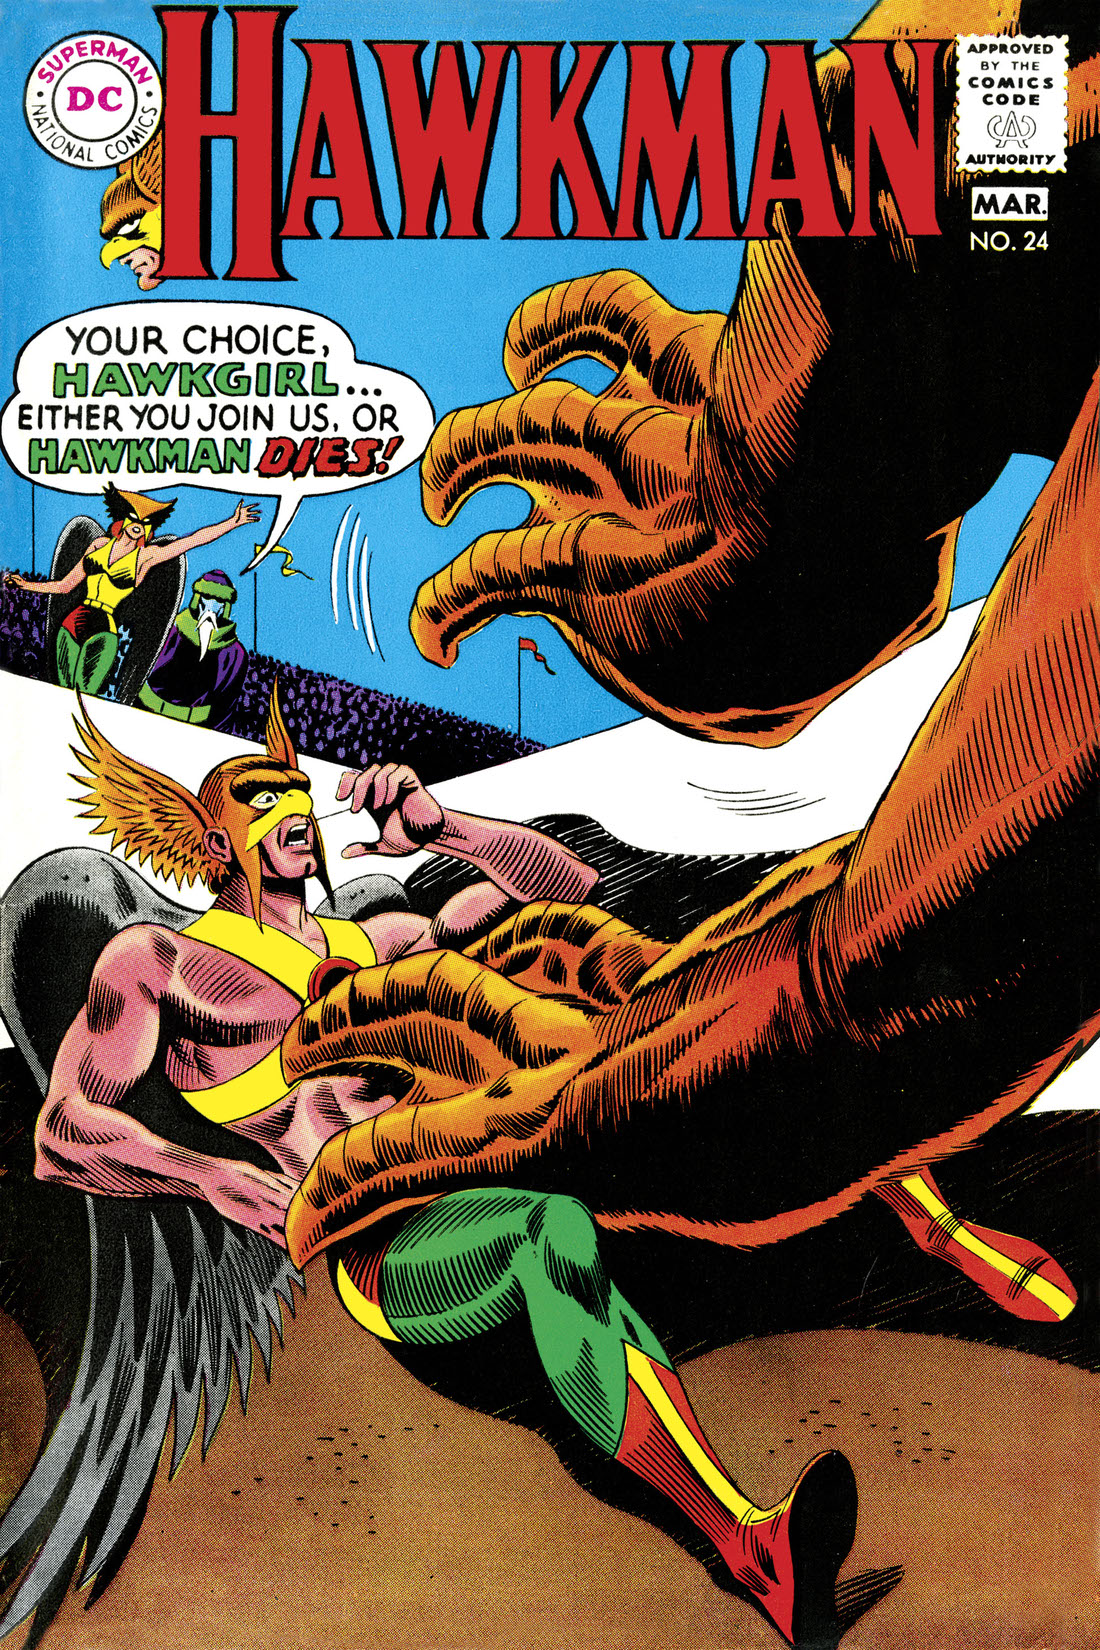 Hawkman (1964-) #24 preview images